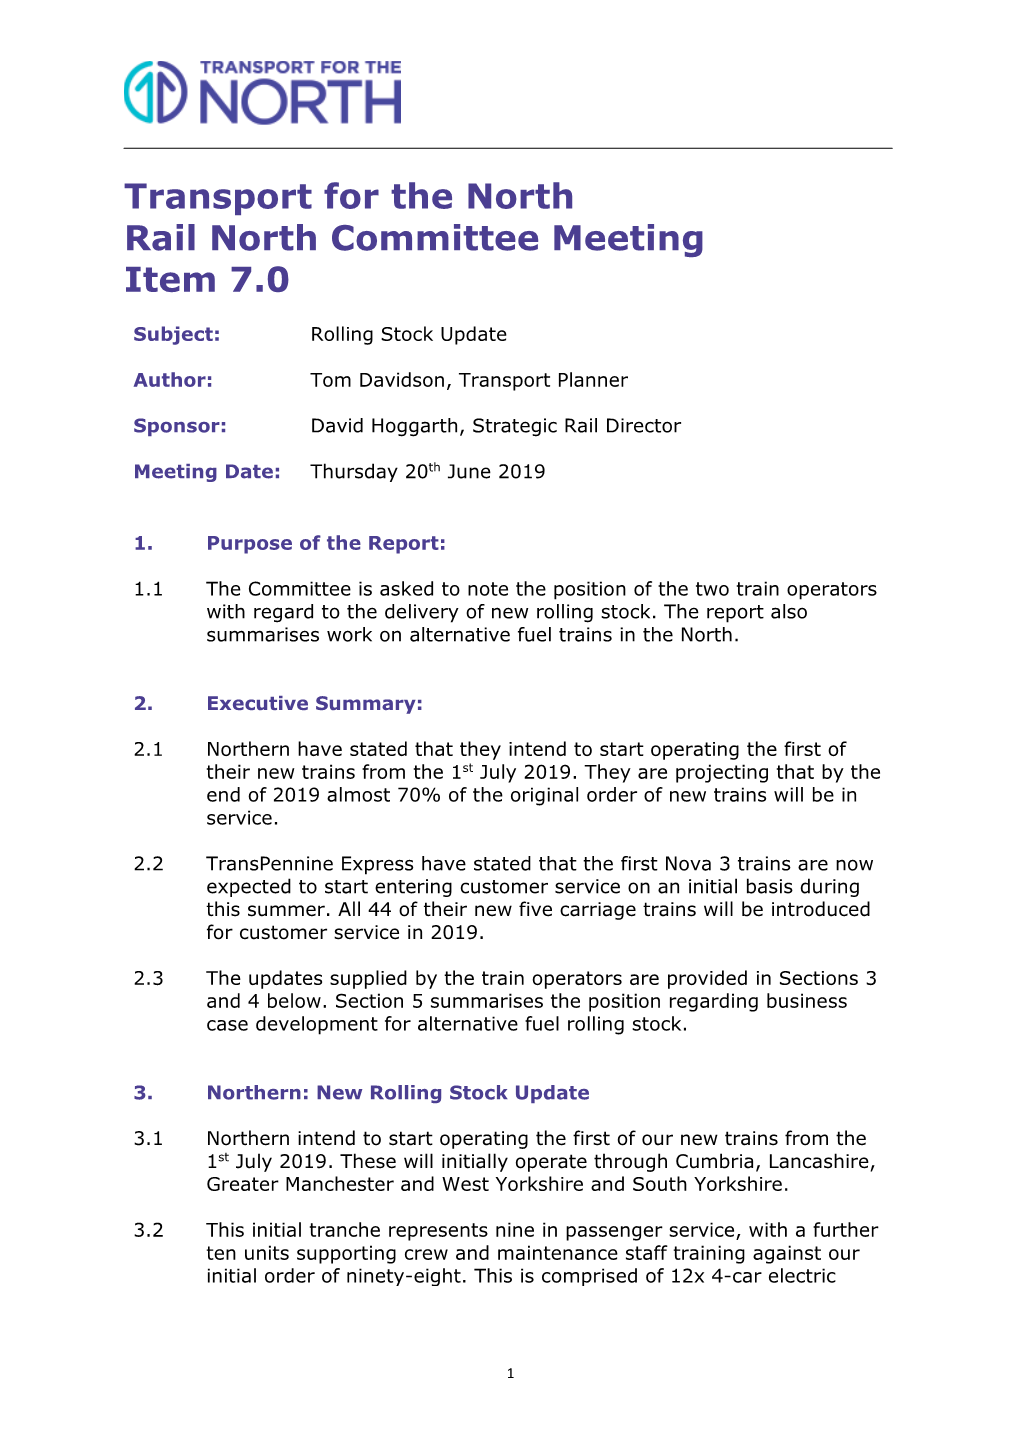 Transport for the North Rail North Committee Meeting Item 7.0